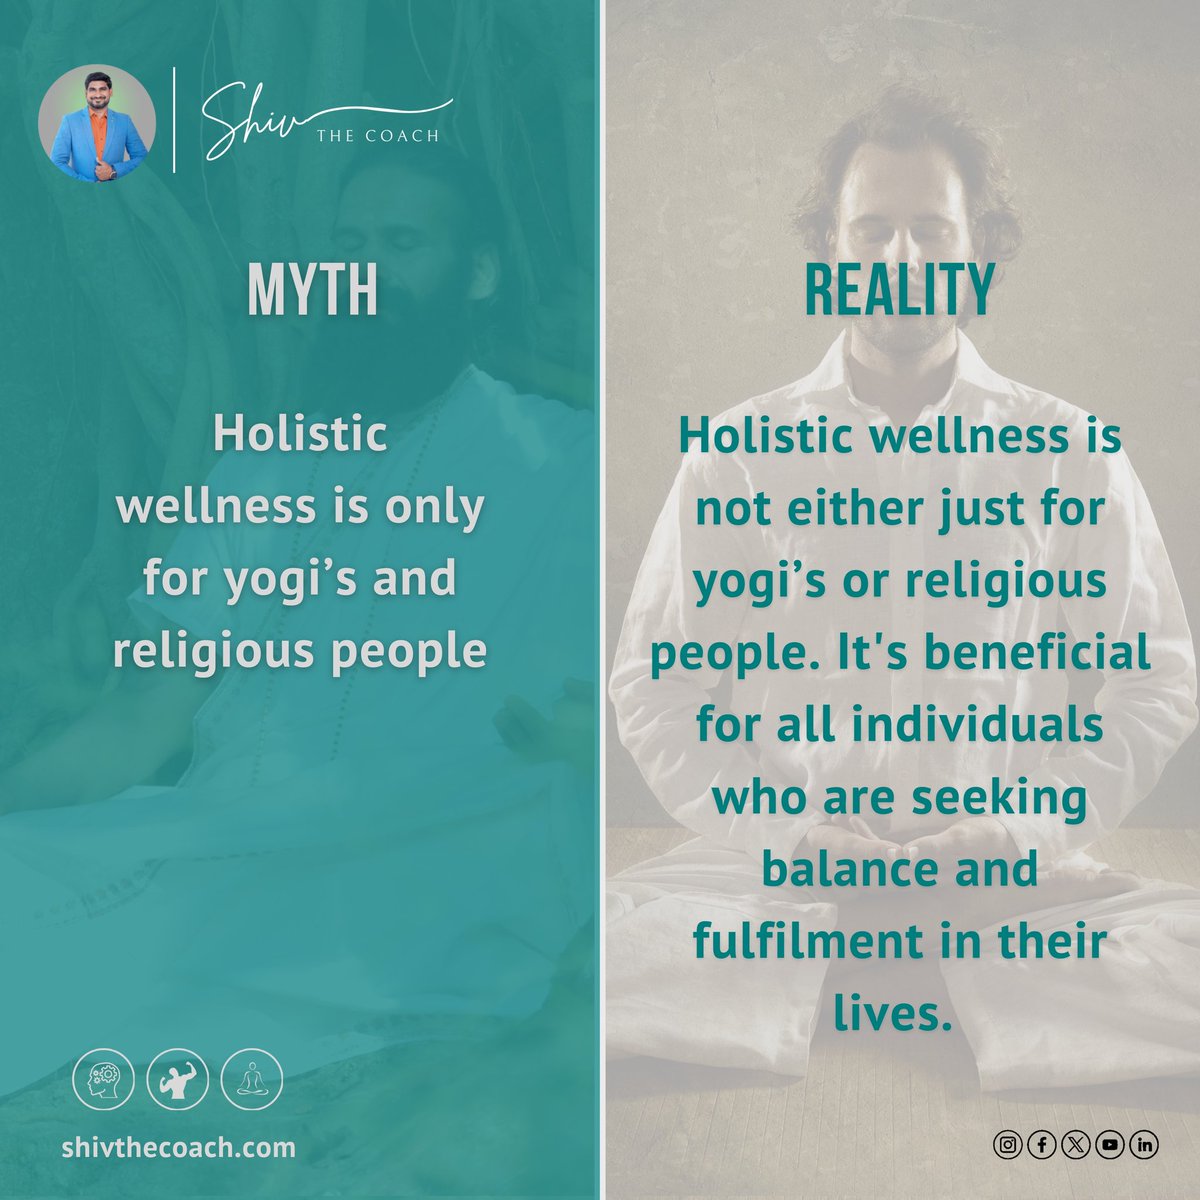 Holistic wellness is not either just for yogi’s or religious people. It's beneficial for all individuals who are seeking balance and fulfilment in their lives.
#HolisticWellness #MindBodySpirit #BalanceAndFulfillment #WellnessJourney #SelfCare #HealthyLiving #WellnessCommunity